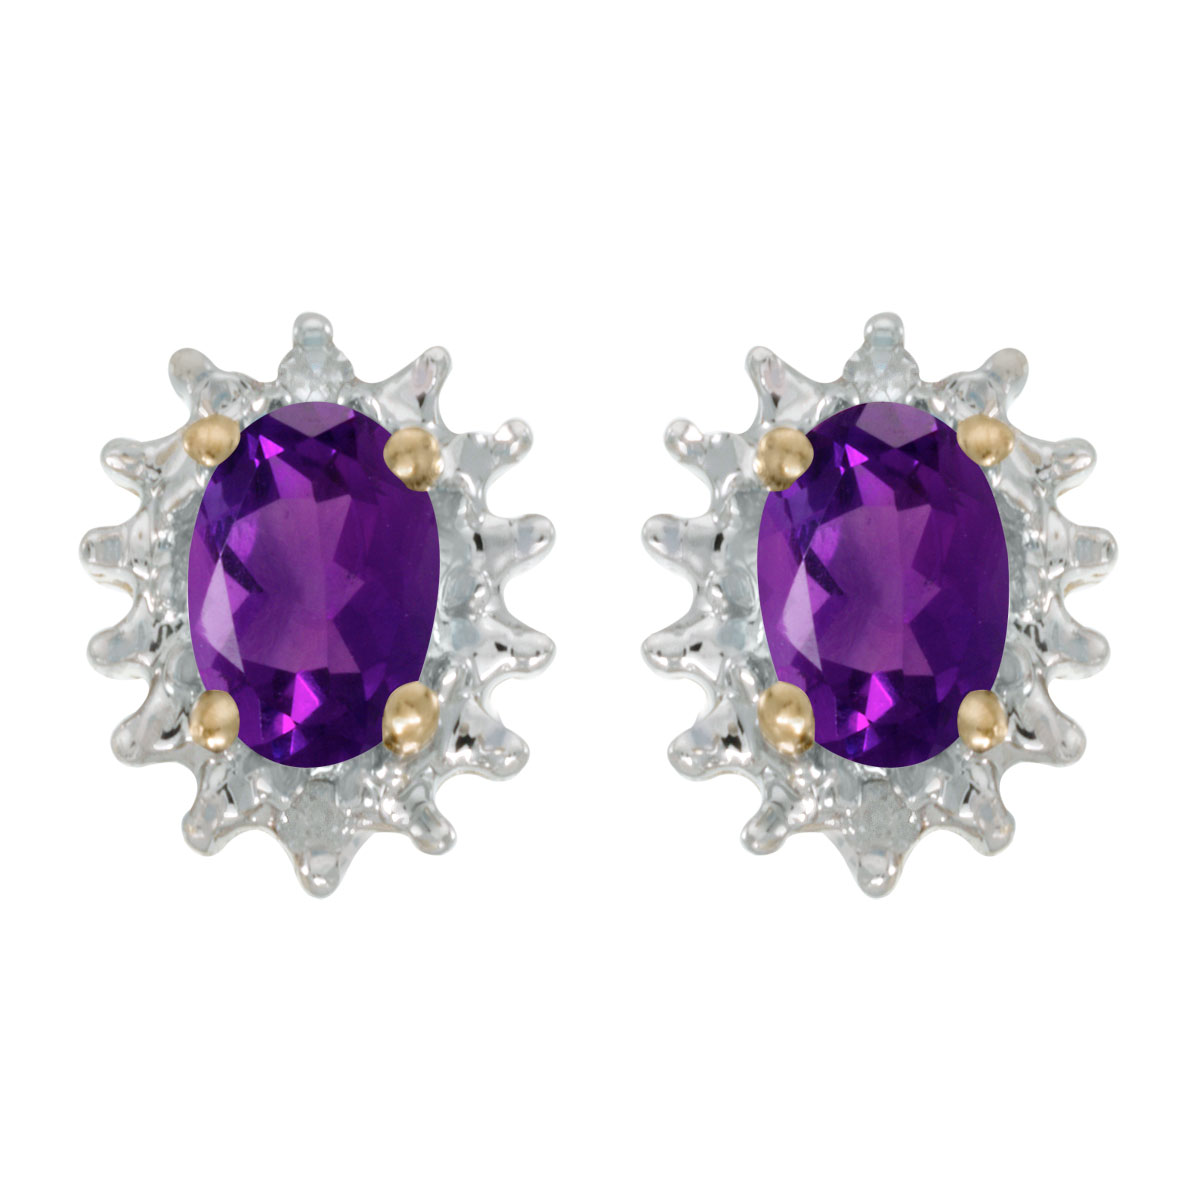 These 14k yellow gold oval amethyst and diamond earrings feature 6x4 mm genuine natural amethysts with a 0.68 ct total weight and .04 ct diamonds.